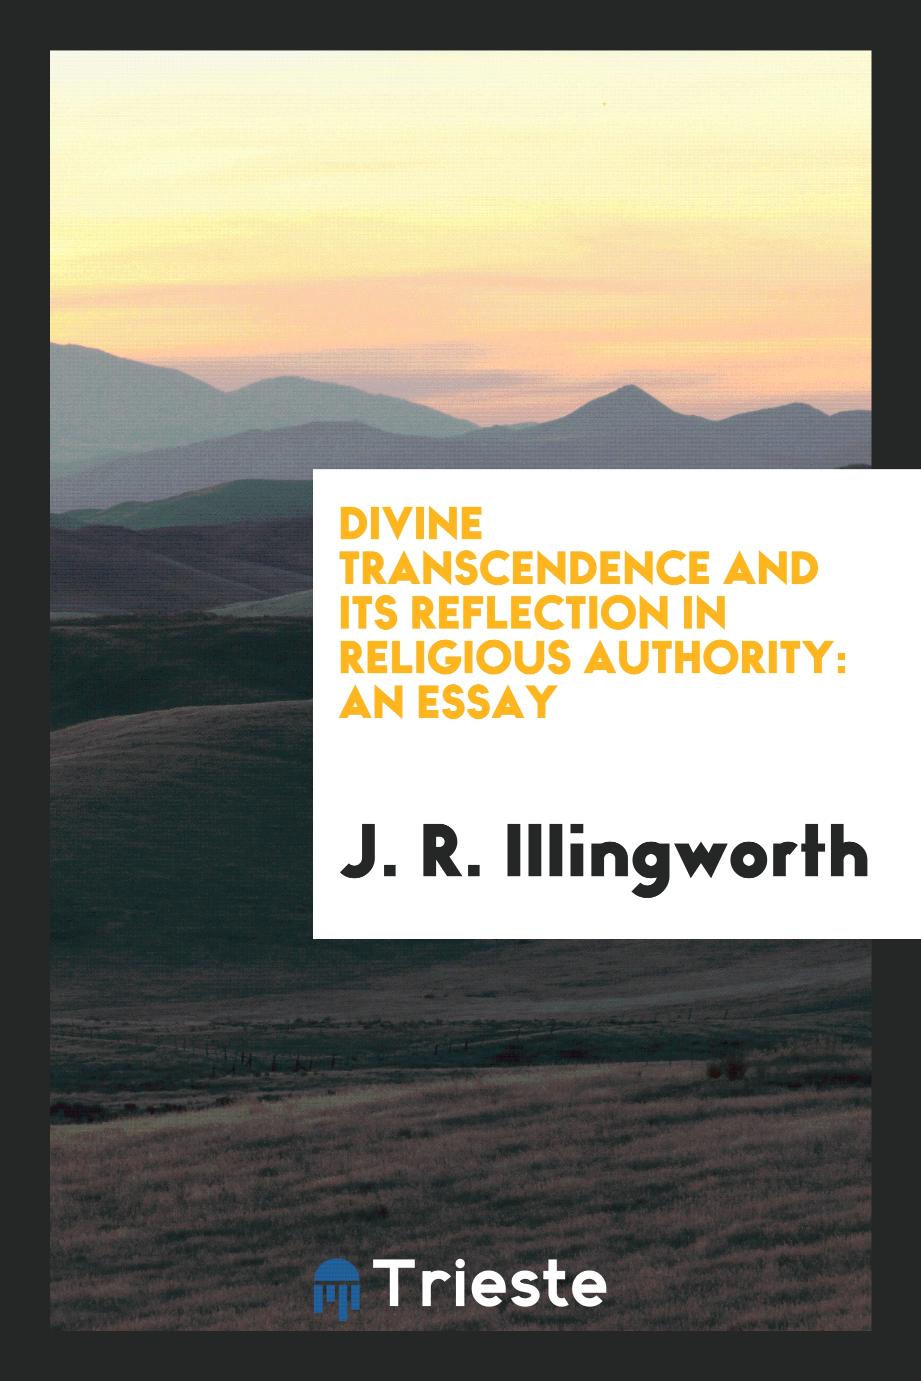 Divine transcendence and its reflection in religious authority: an essay